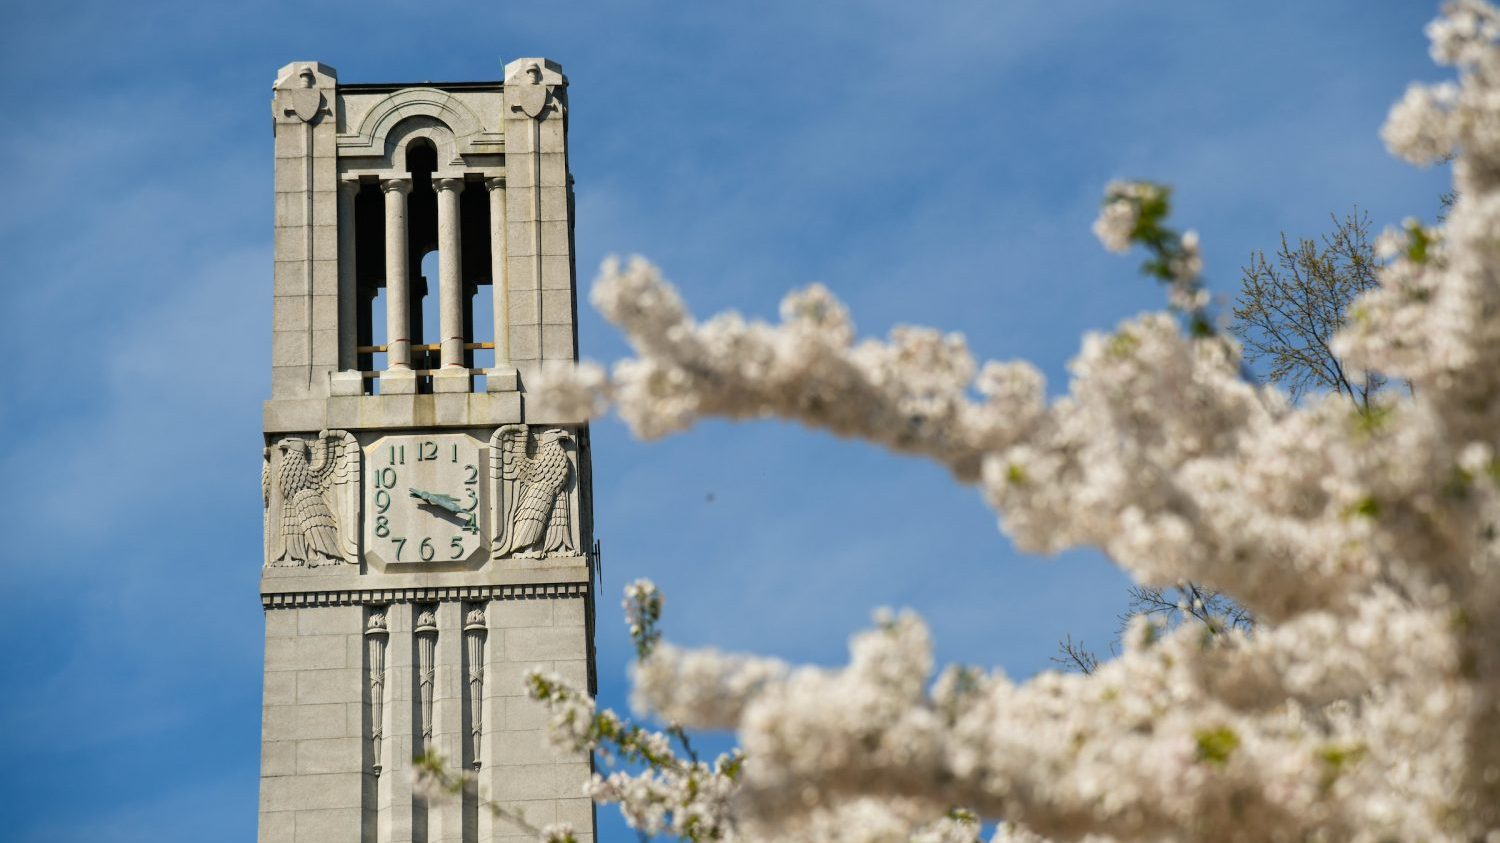 The belltower framed by blooming trees in Spring